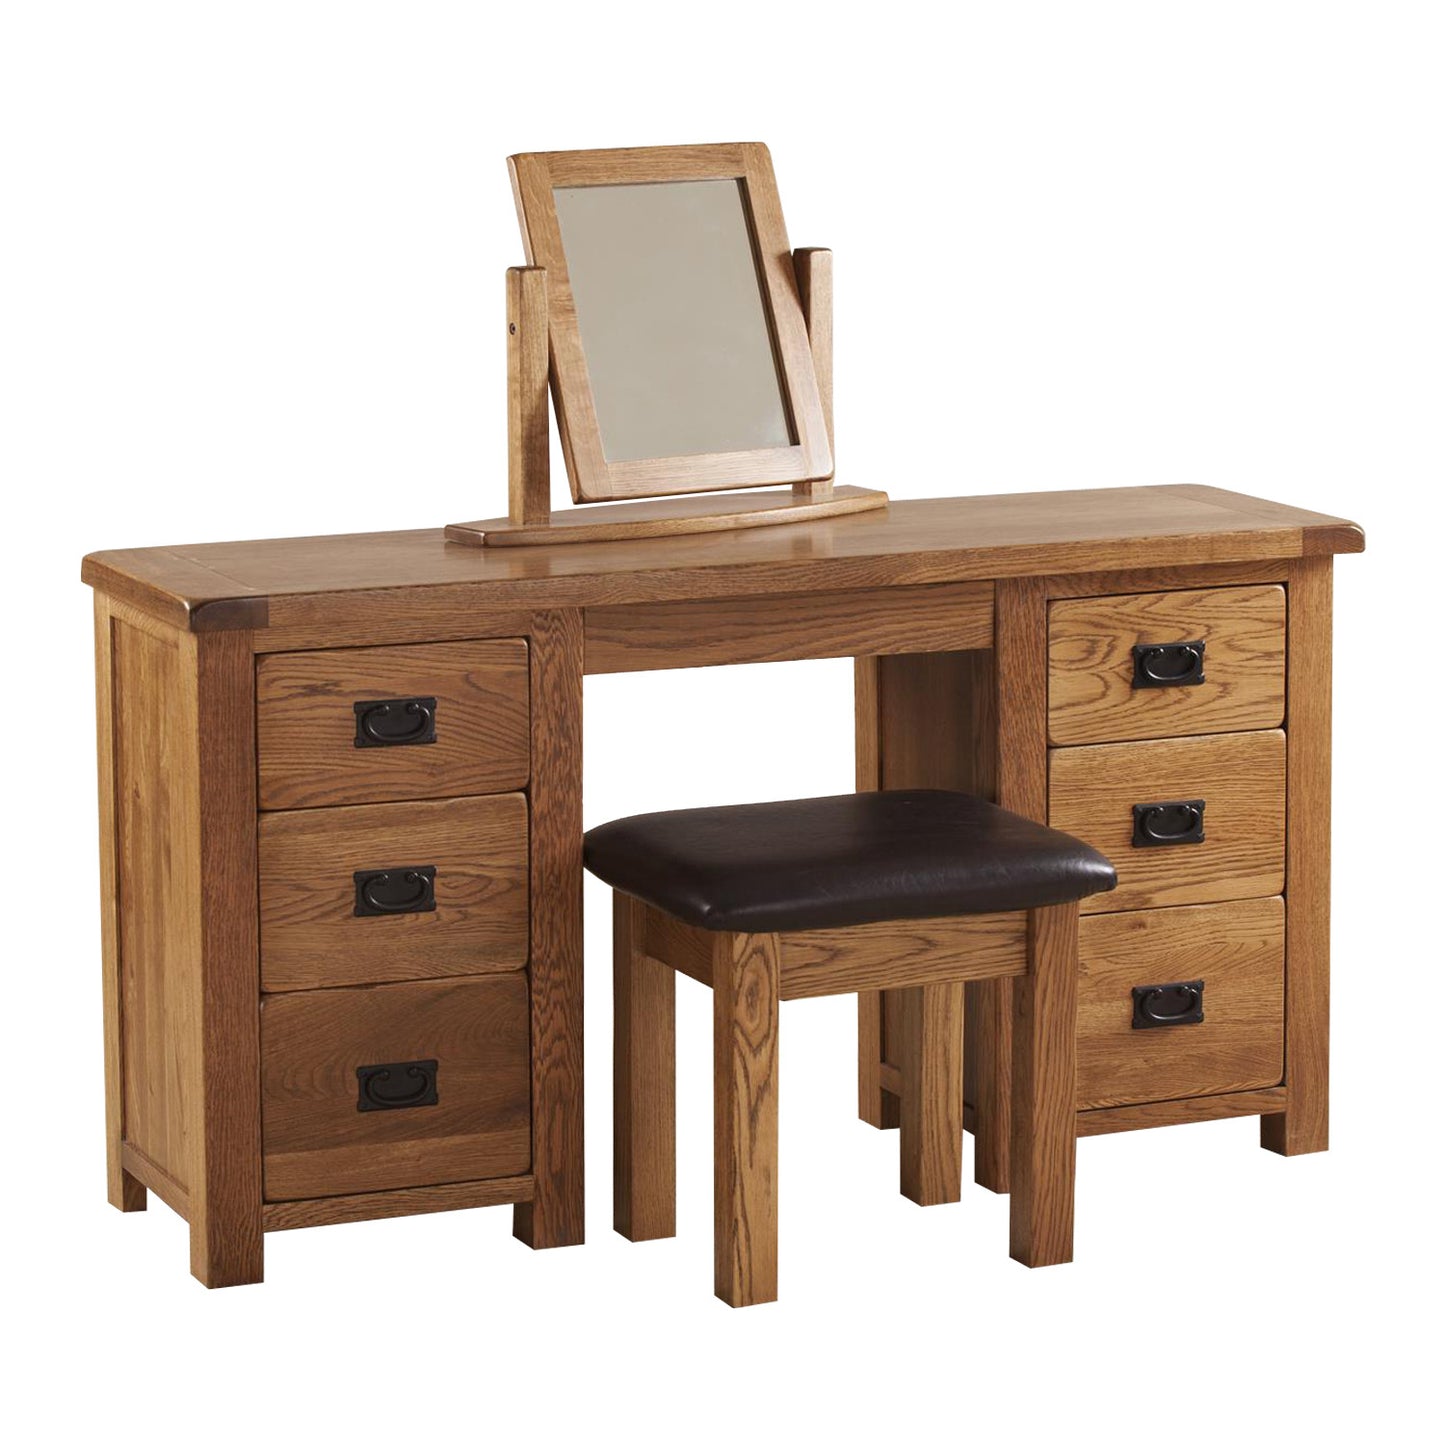 Auvergne Solid Oak Dressing Table - Double Pedestal - Better Furniture Norwich & Great Yarmouth